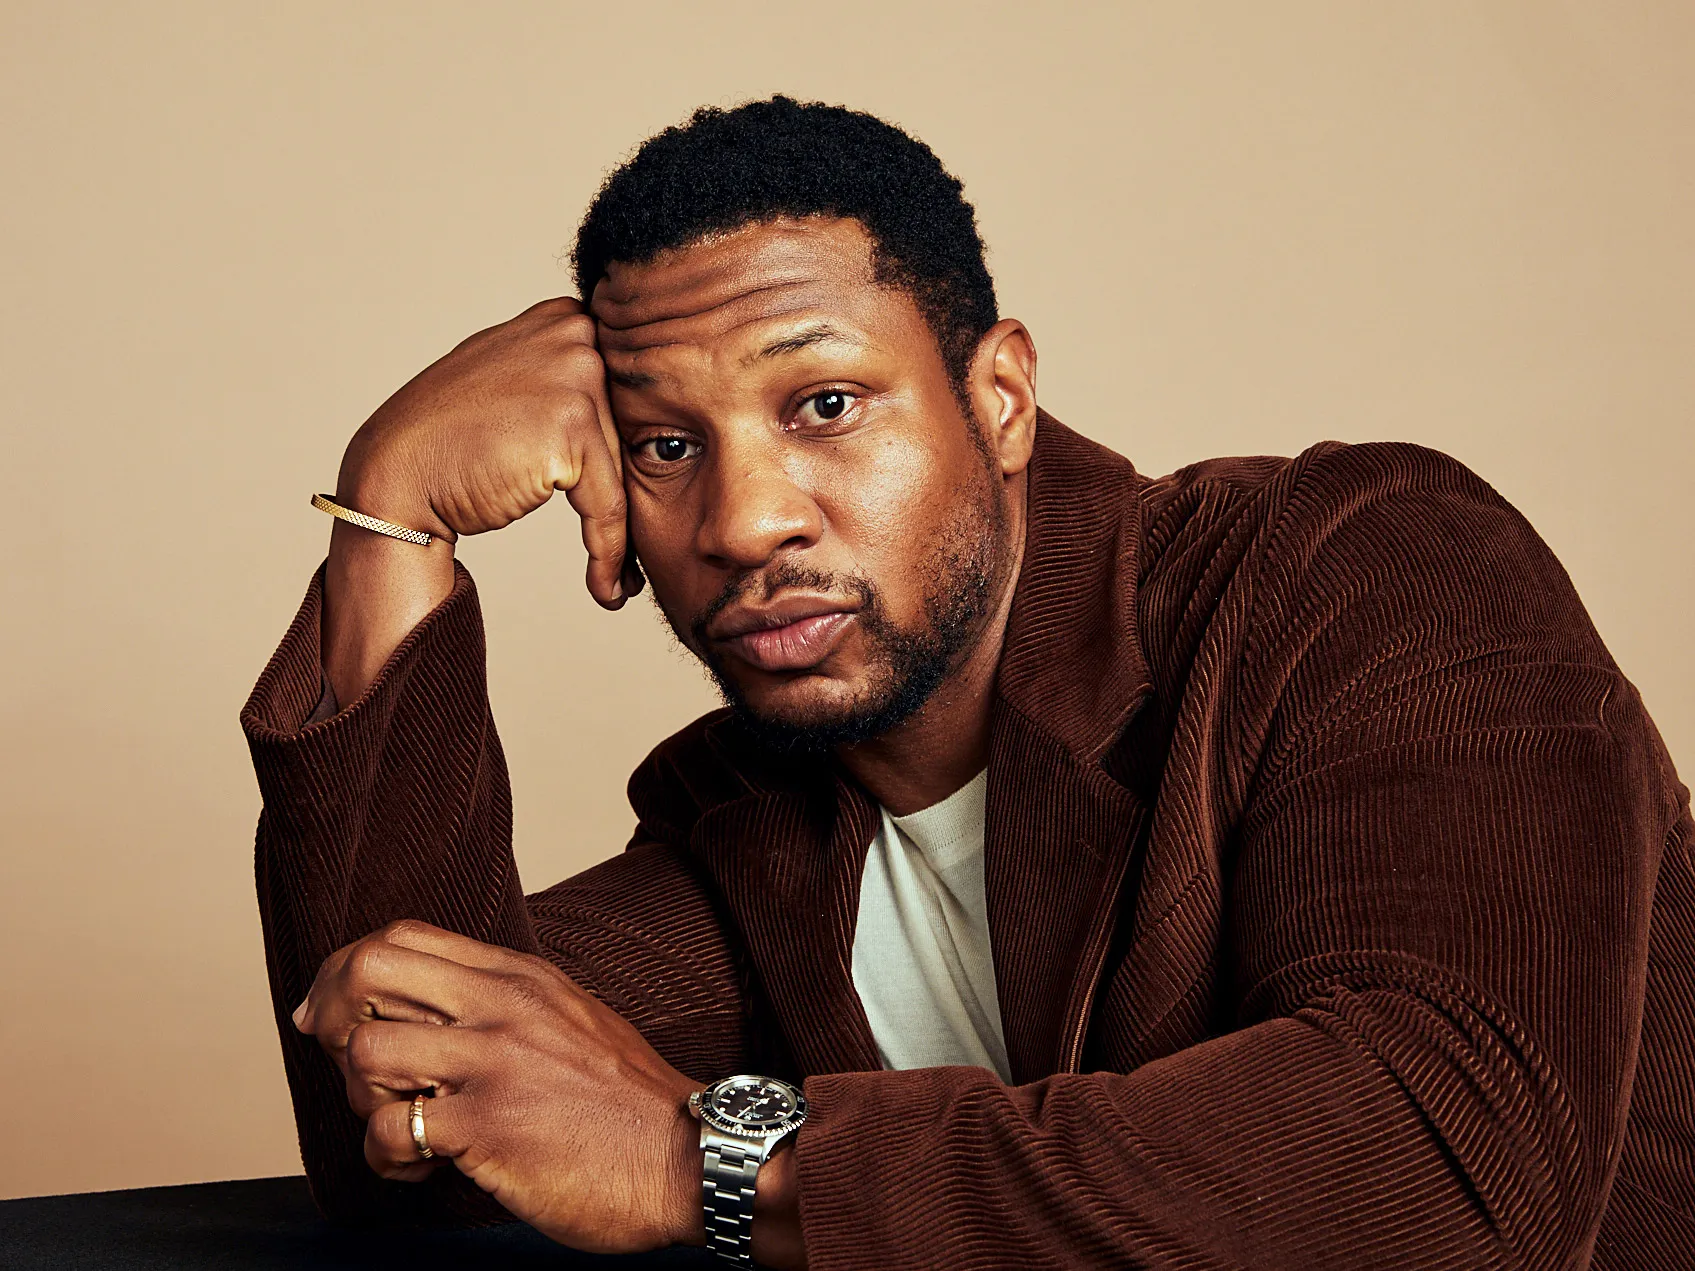 Jonathan Majors’ Rep Speaks Out After Star is Arrested for Allegedly Assaulting His Girlfriend: “He’s Done Nothing Wrong”